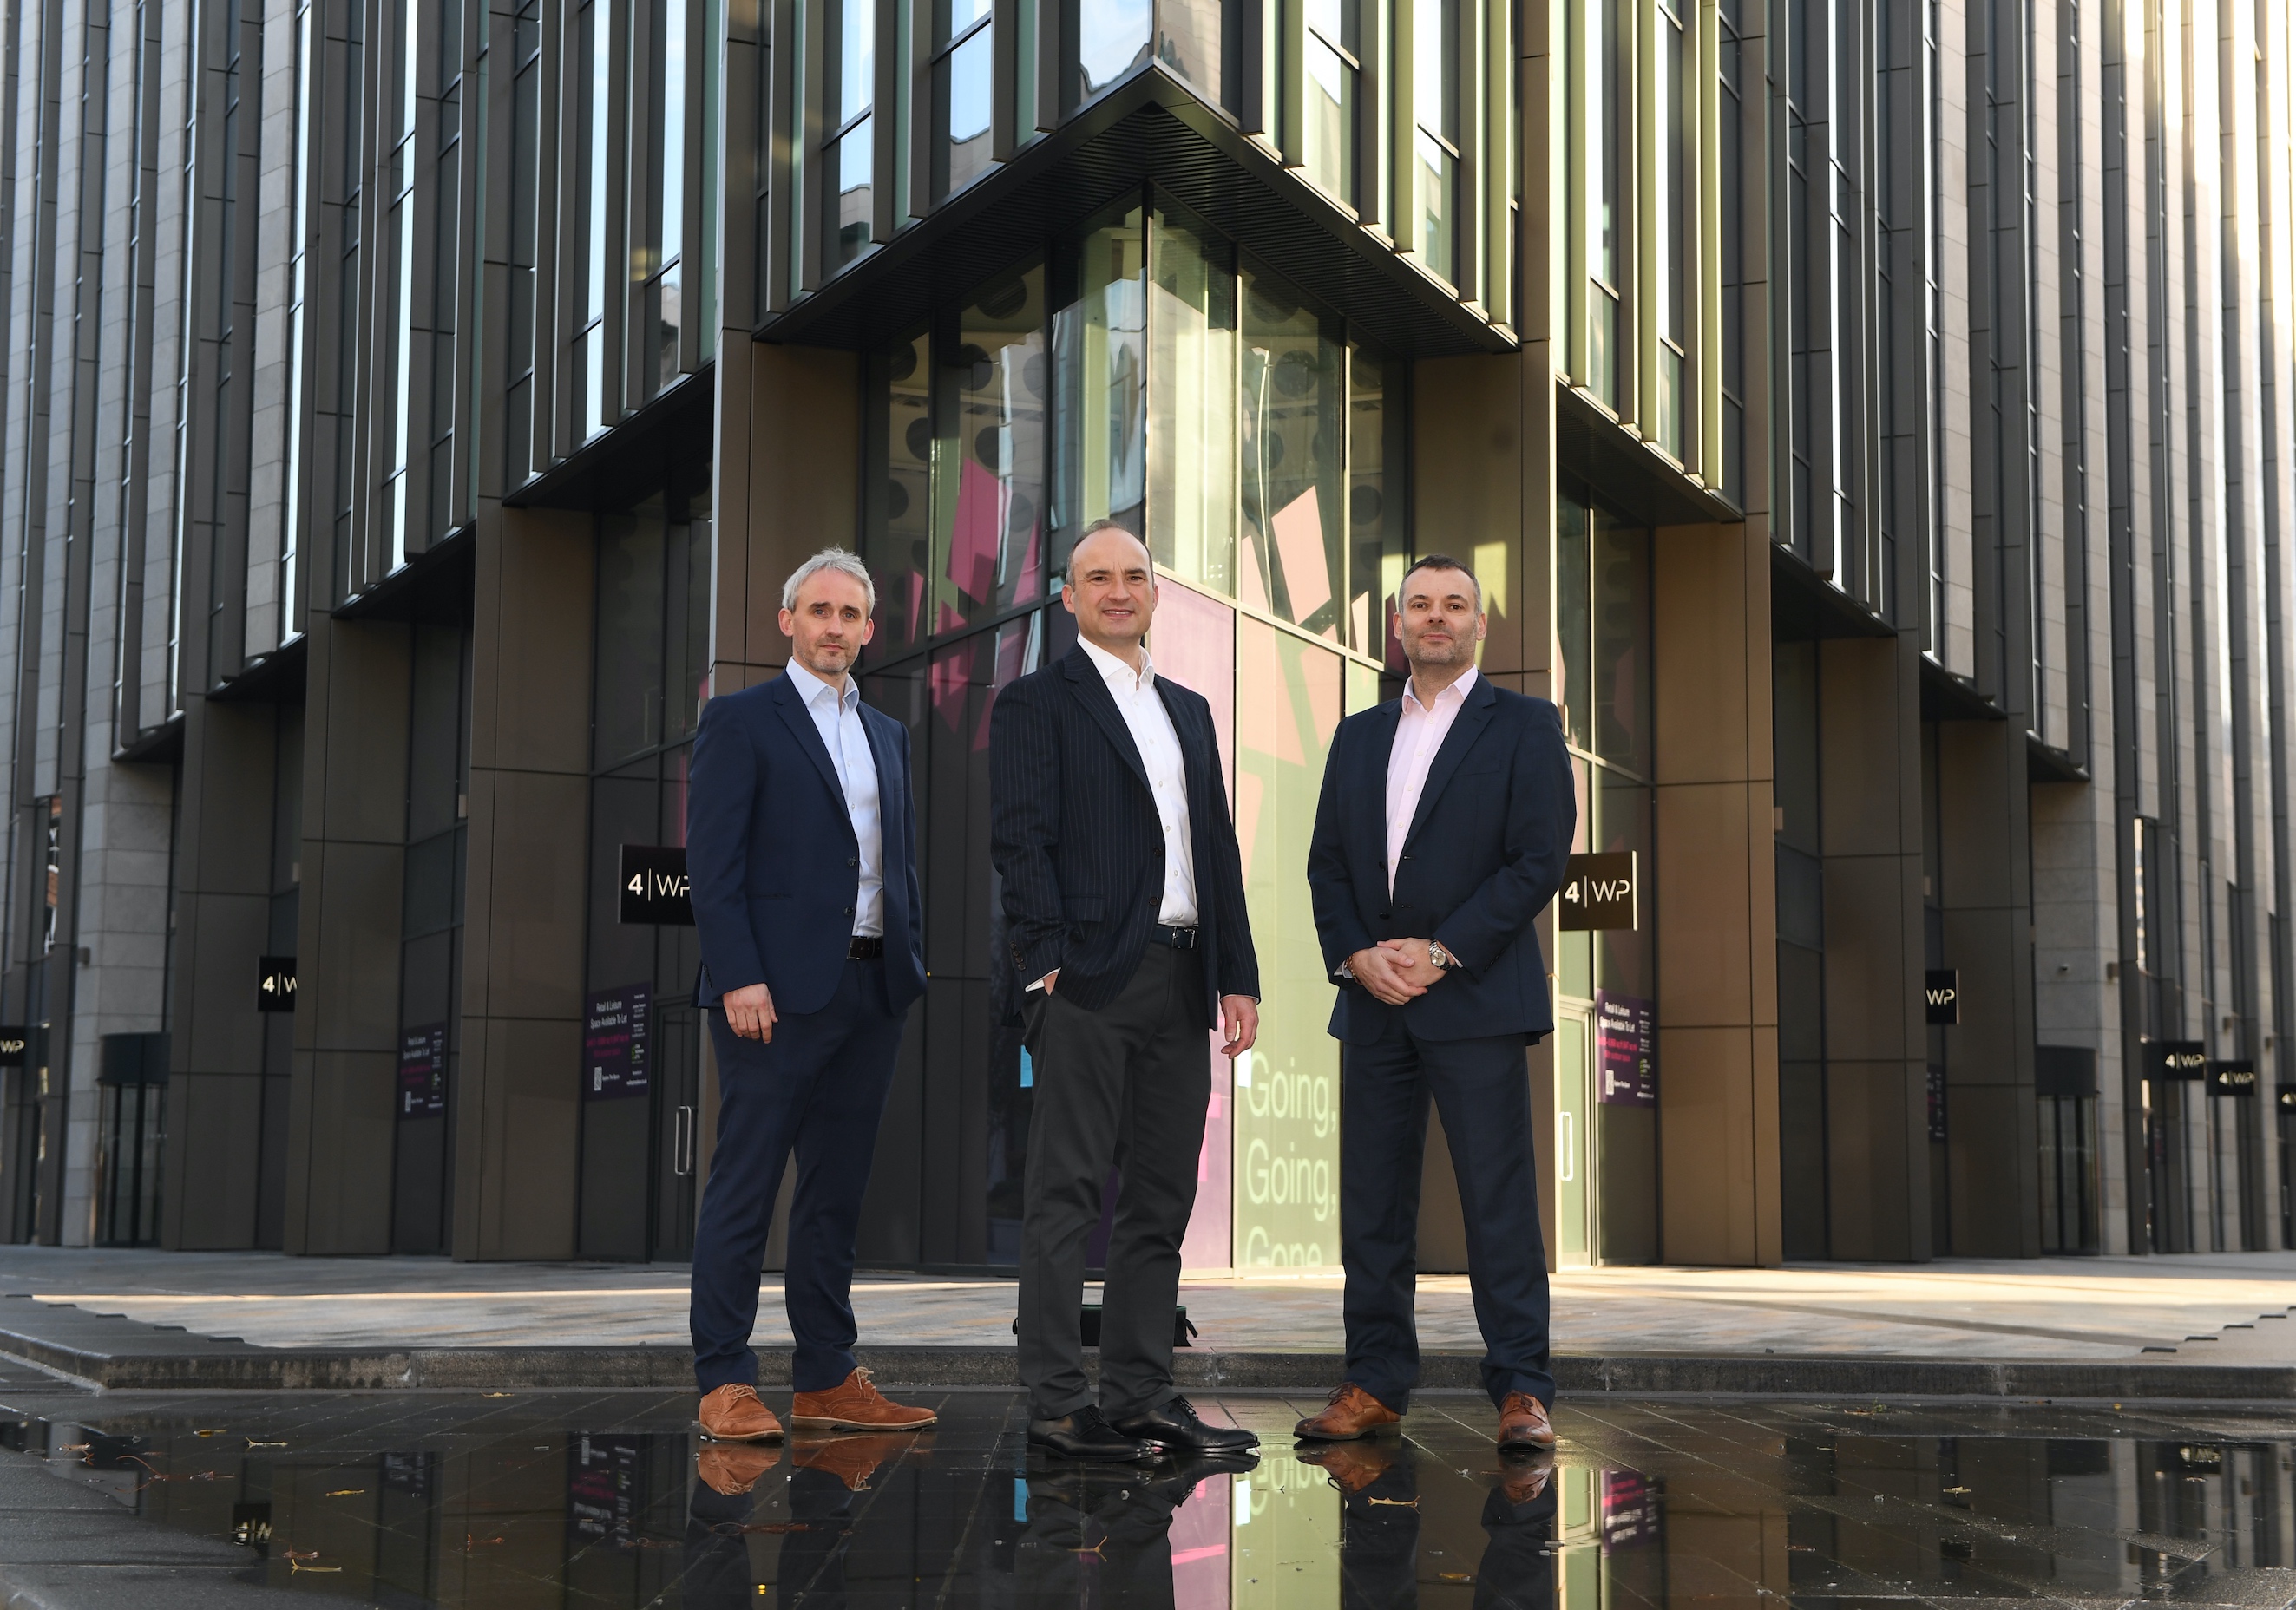 Glasgow-headquartered Murgitroyd acquires specialist IP protection firm TLIP